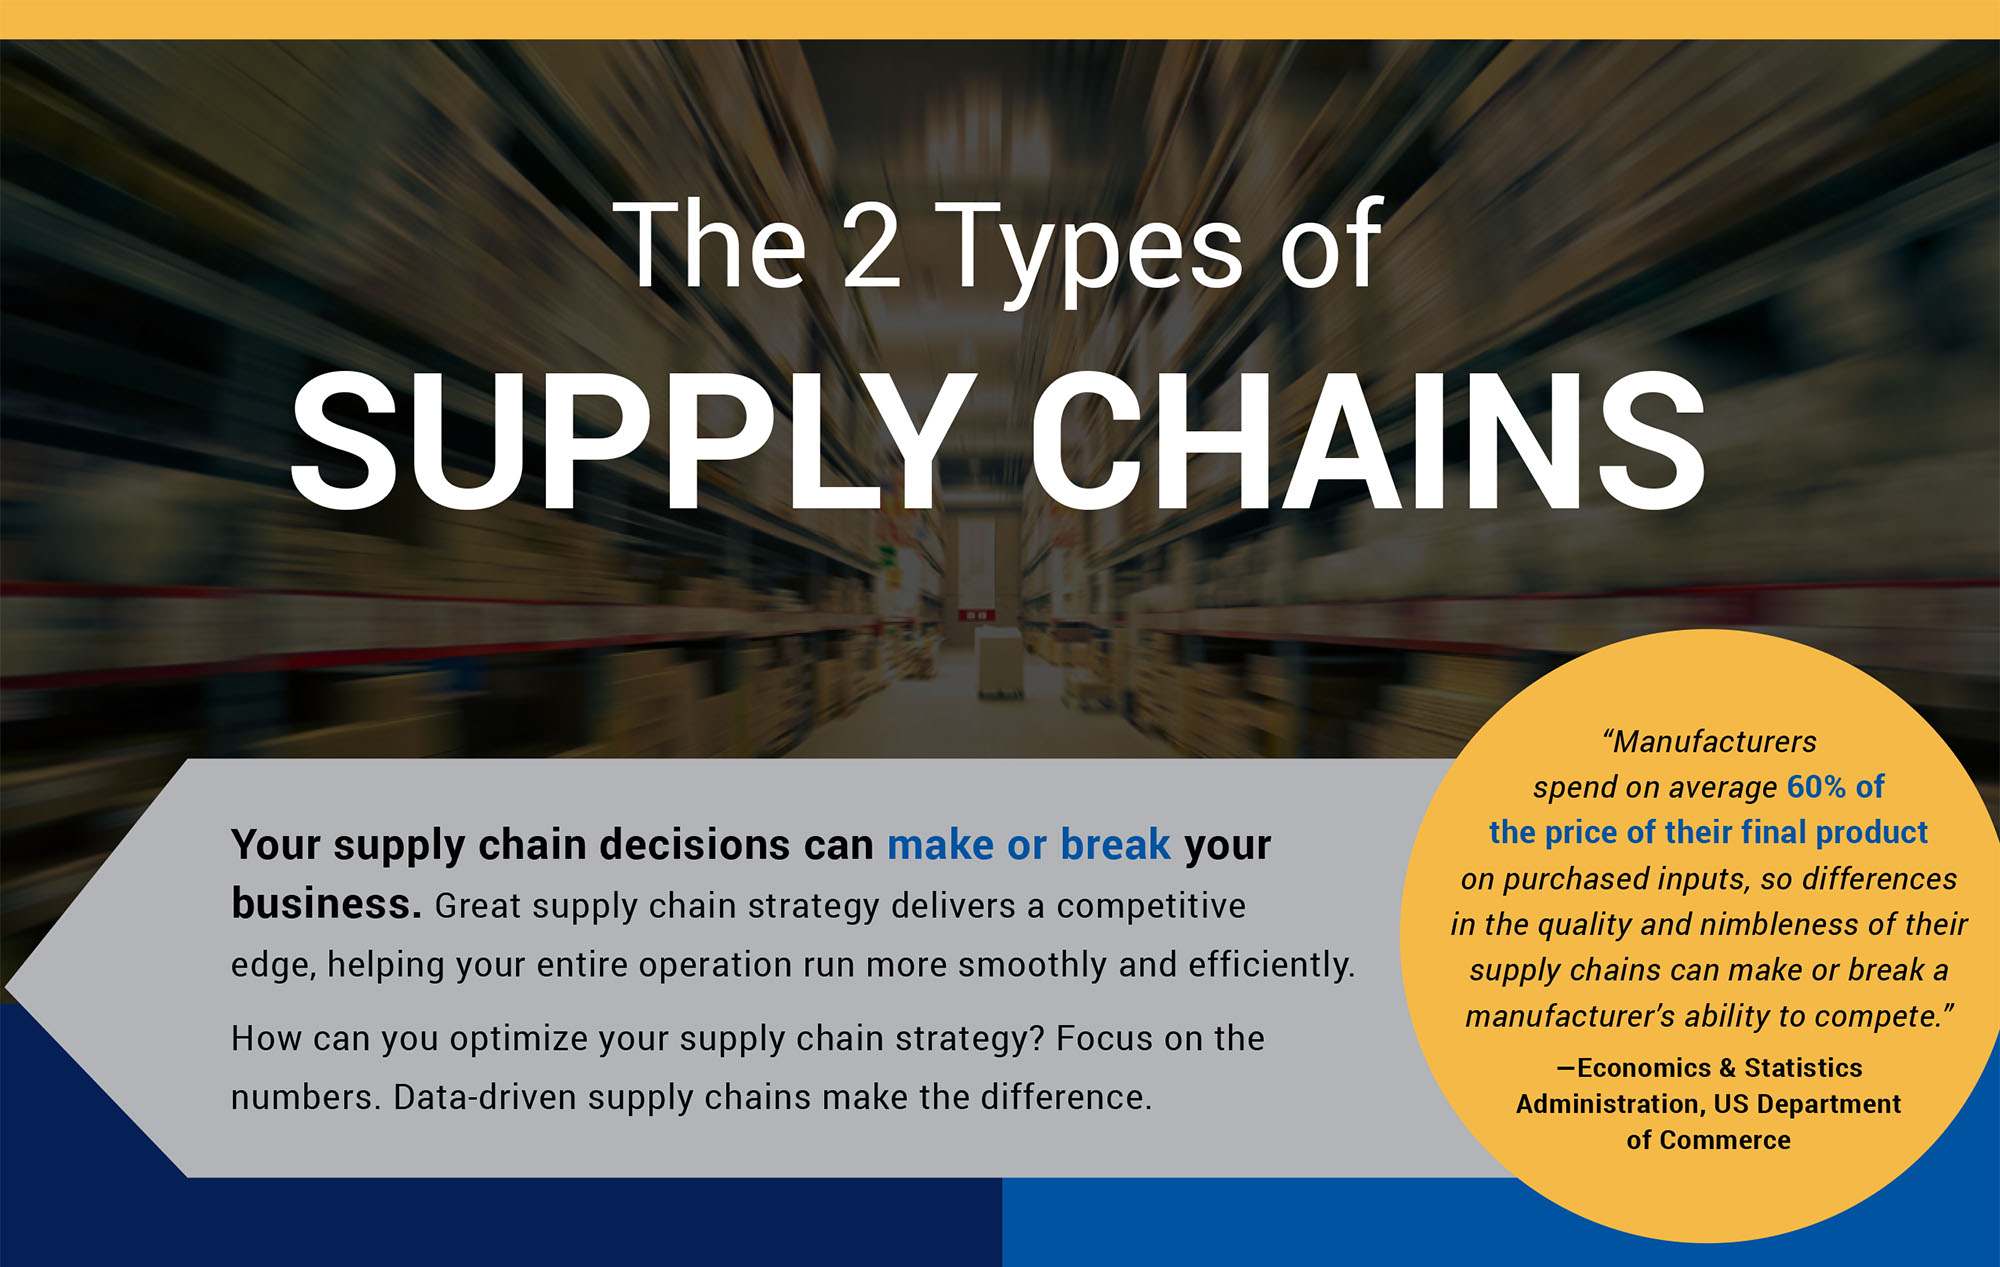 The 2 Types of Supply Chains